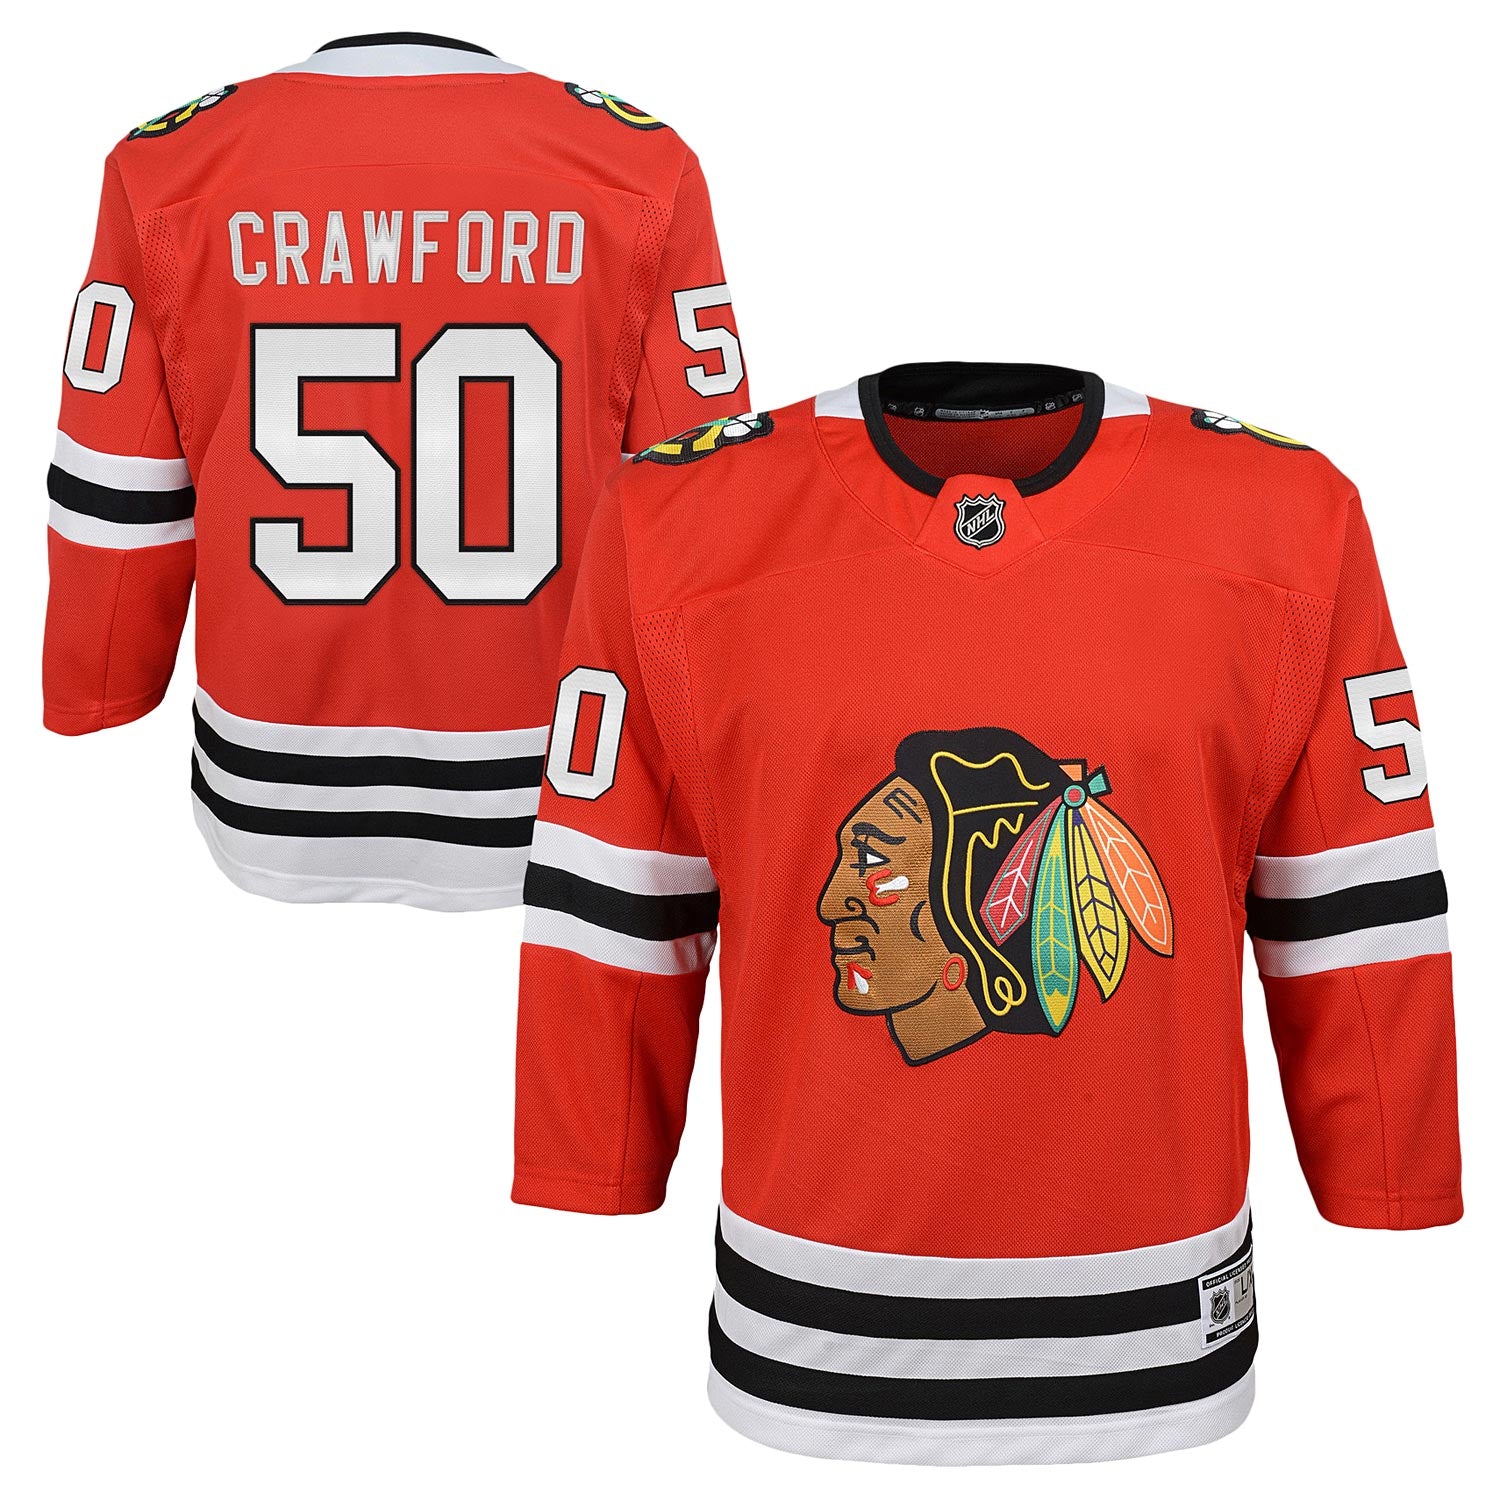 NHL Youth Chicago Blackhawks Premier Red Home Jersey L/XL